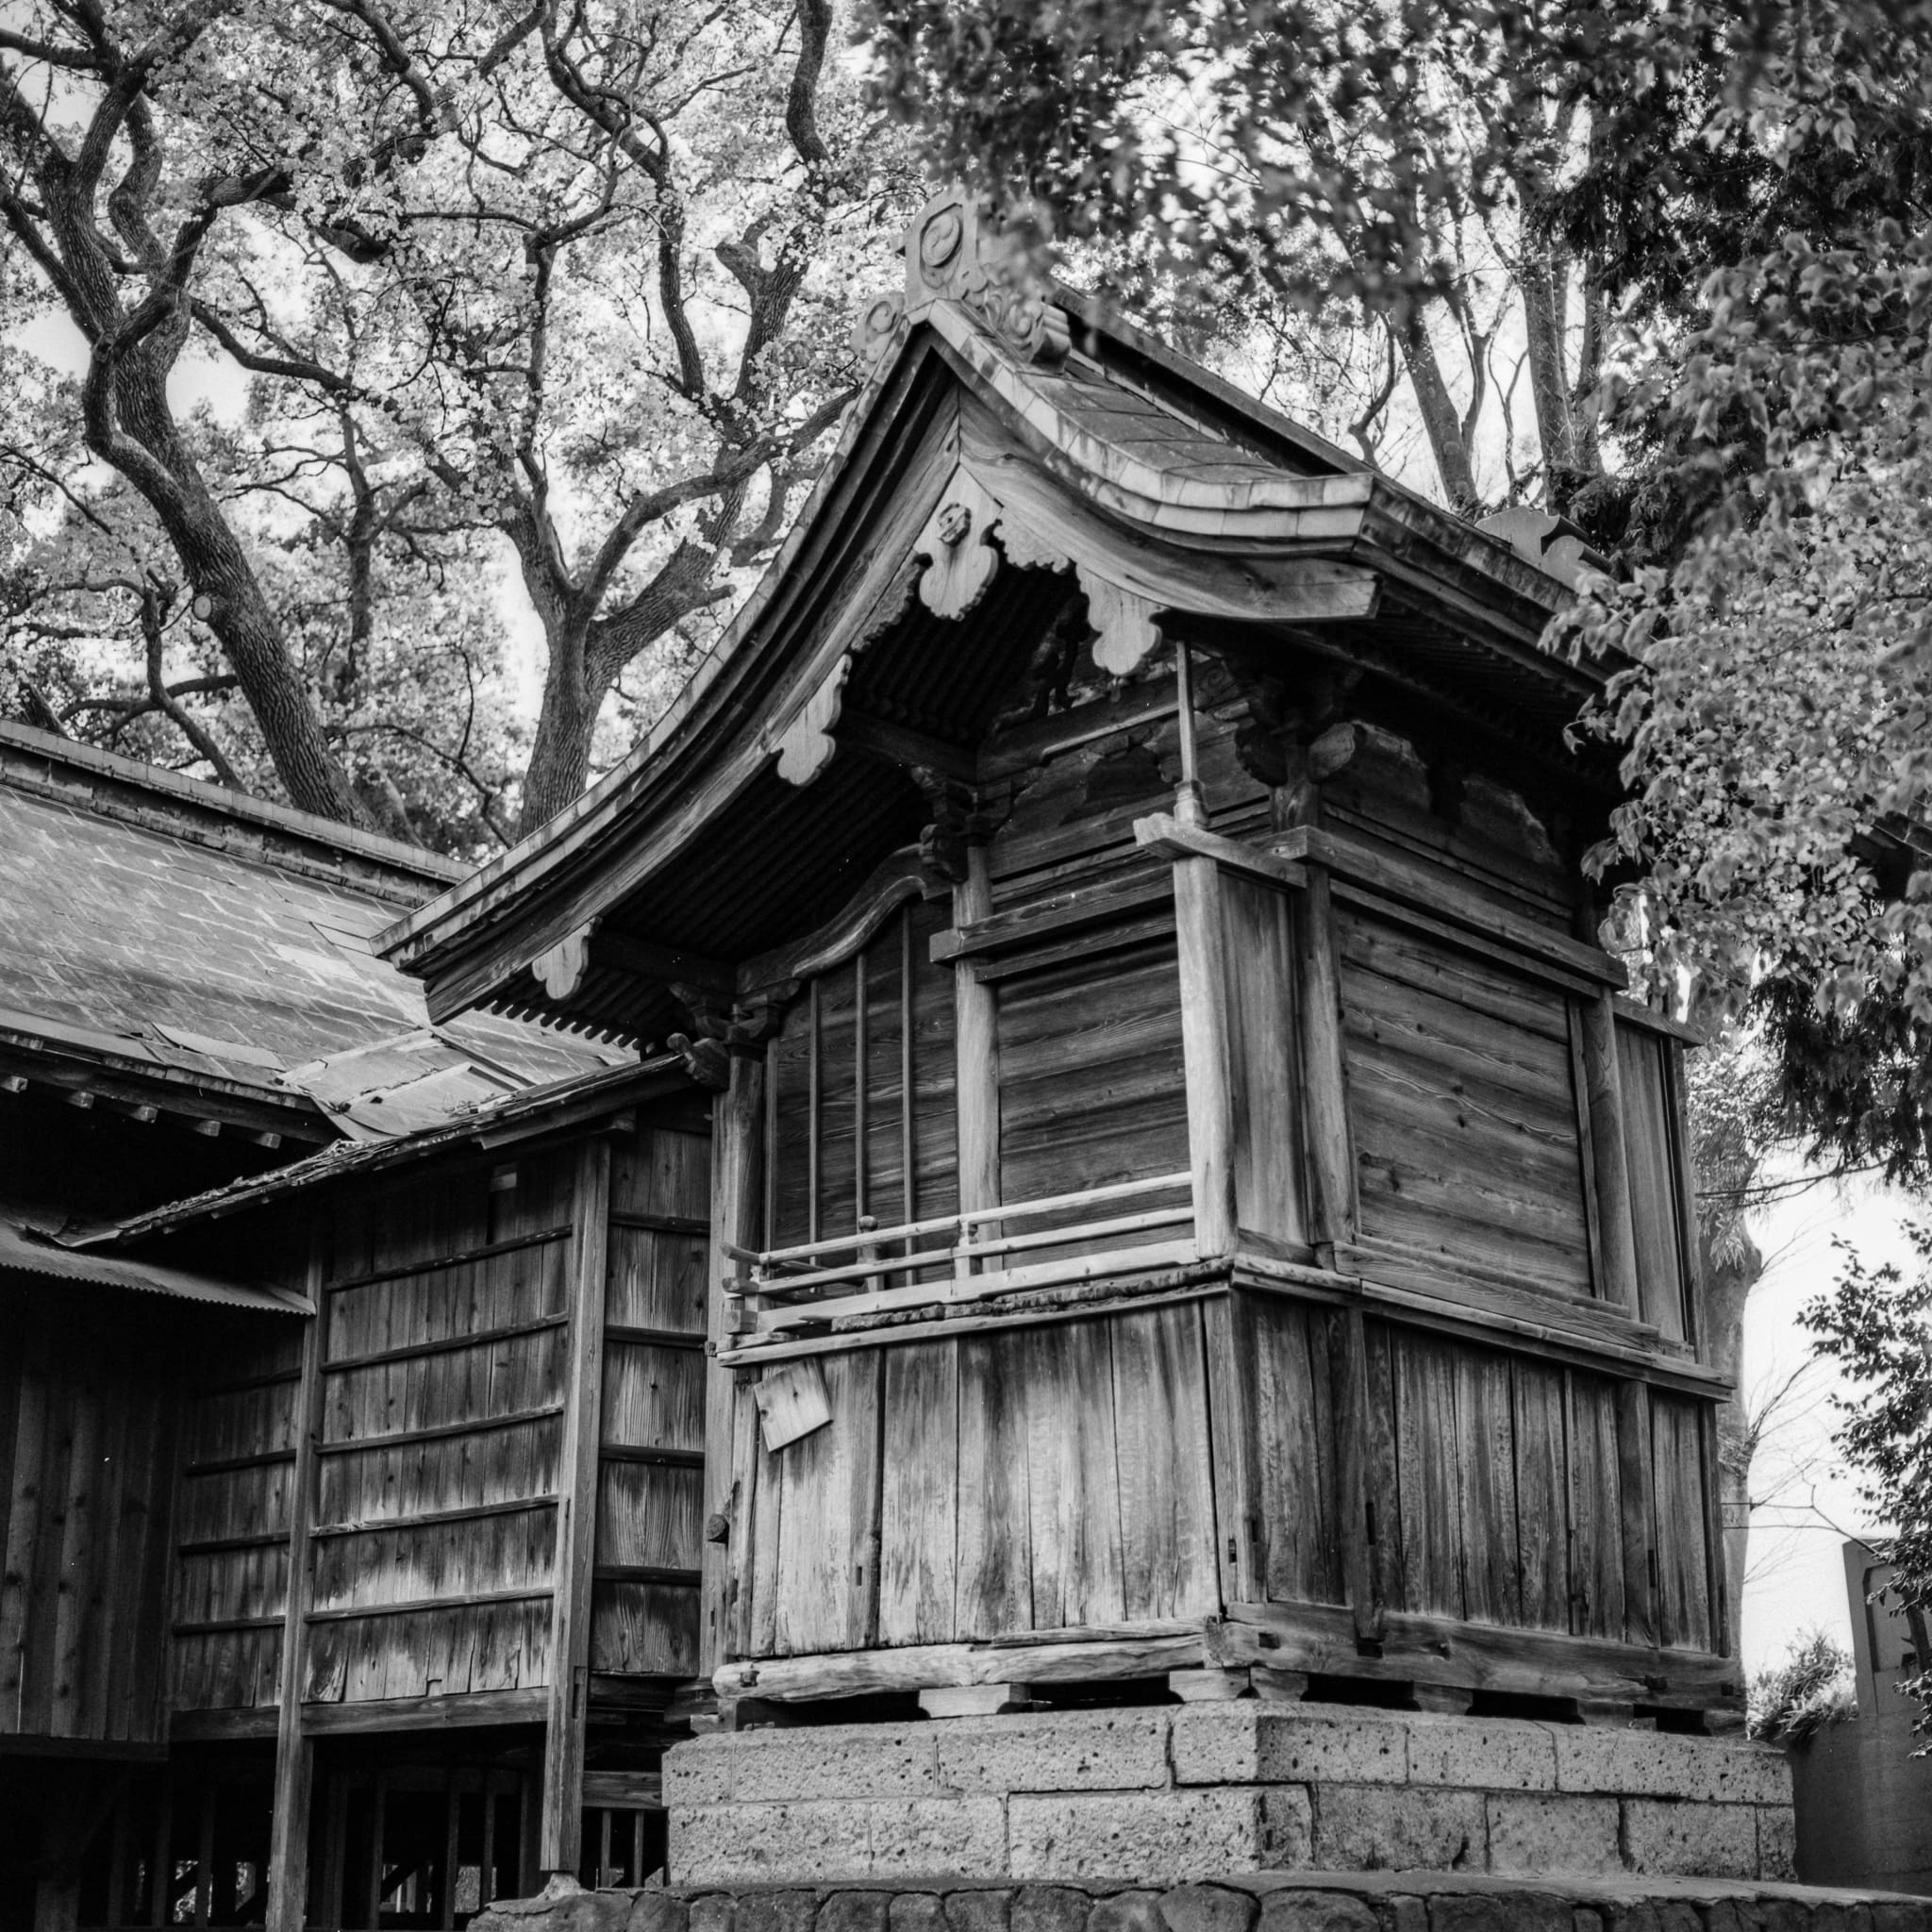 Black and white photo of weathered, traditional Japanese wooden architecture amidst bare trees.